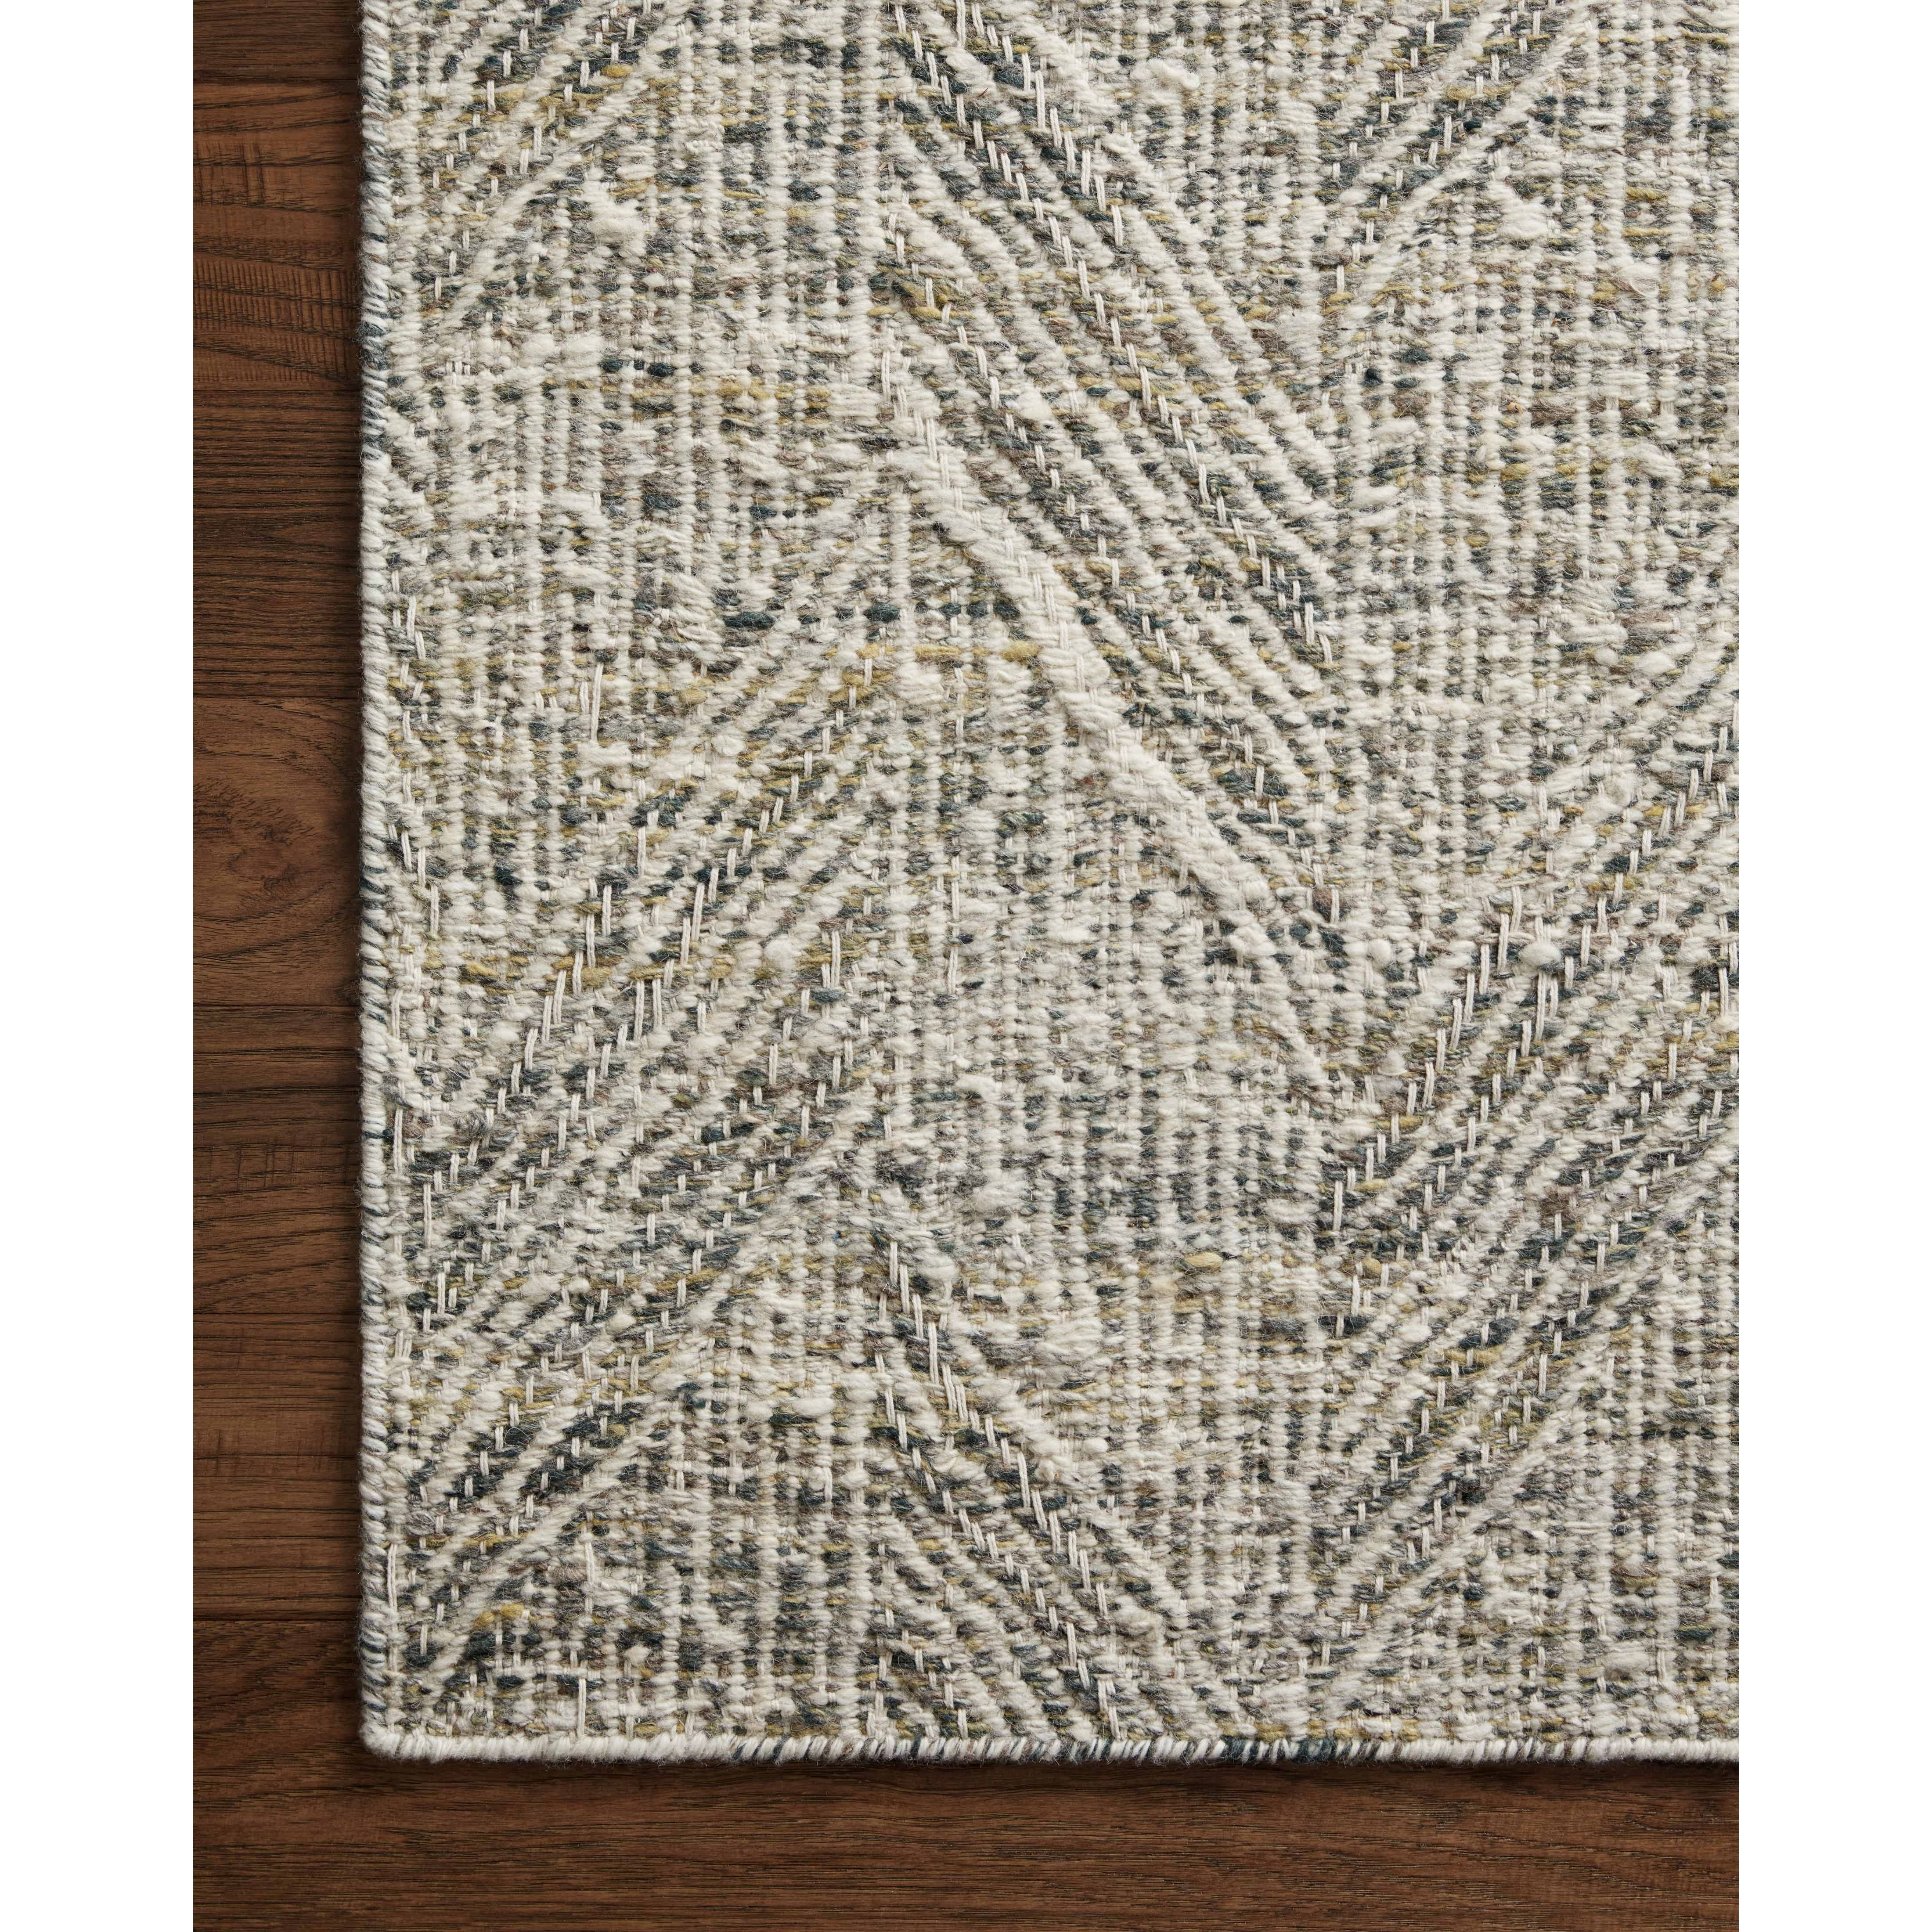 The Raven Moss / Ivory Rug is intricately handwoven with delicate, fine yarns that amplify the rug's layered and dimensional geometric design. While the rug itself is thick and sturdy, the colors and patterns have a casual lightness that can work in many spaces, from busy living rooms to serene bedrooms. Amethyst Home provides interior design, new construction, custom furniture, and area rugs in the Monterey metro area.